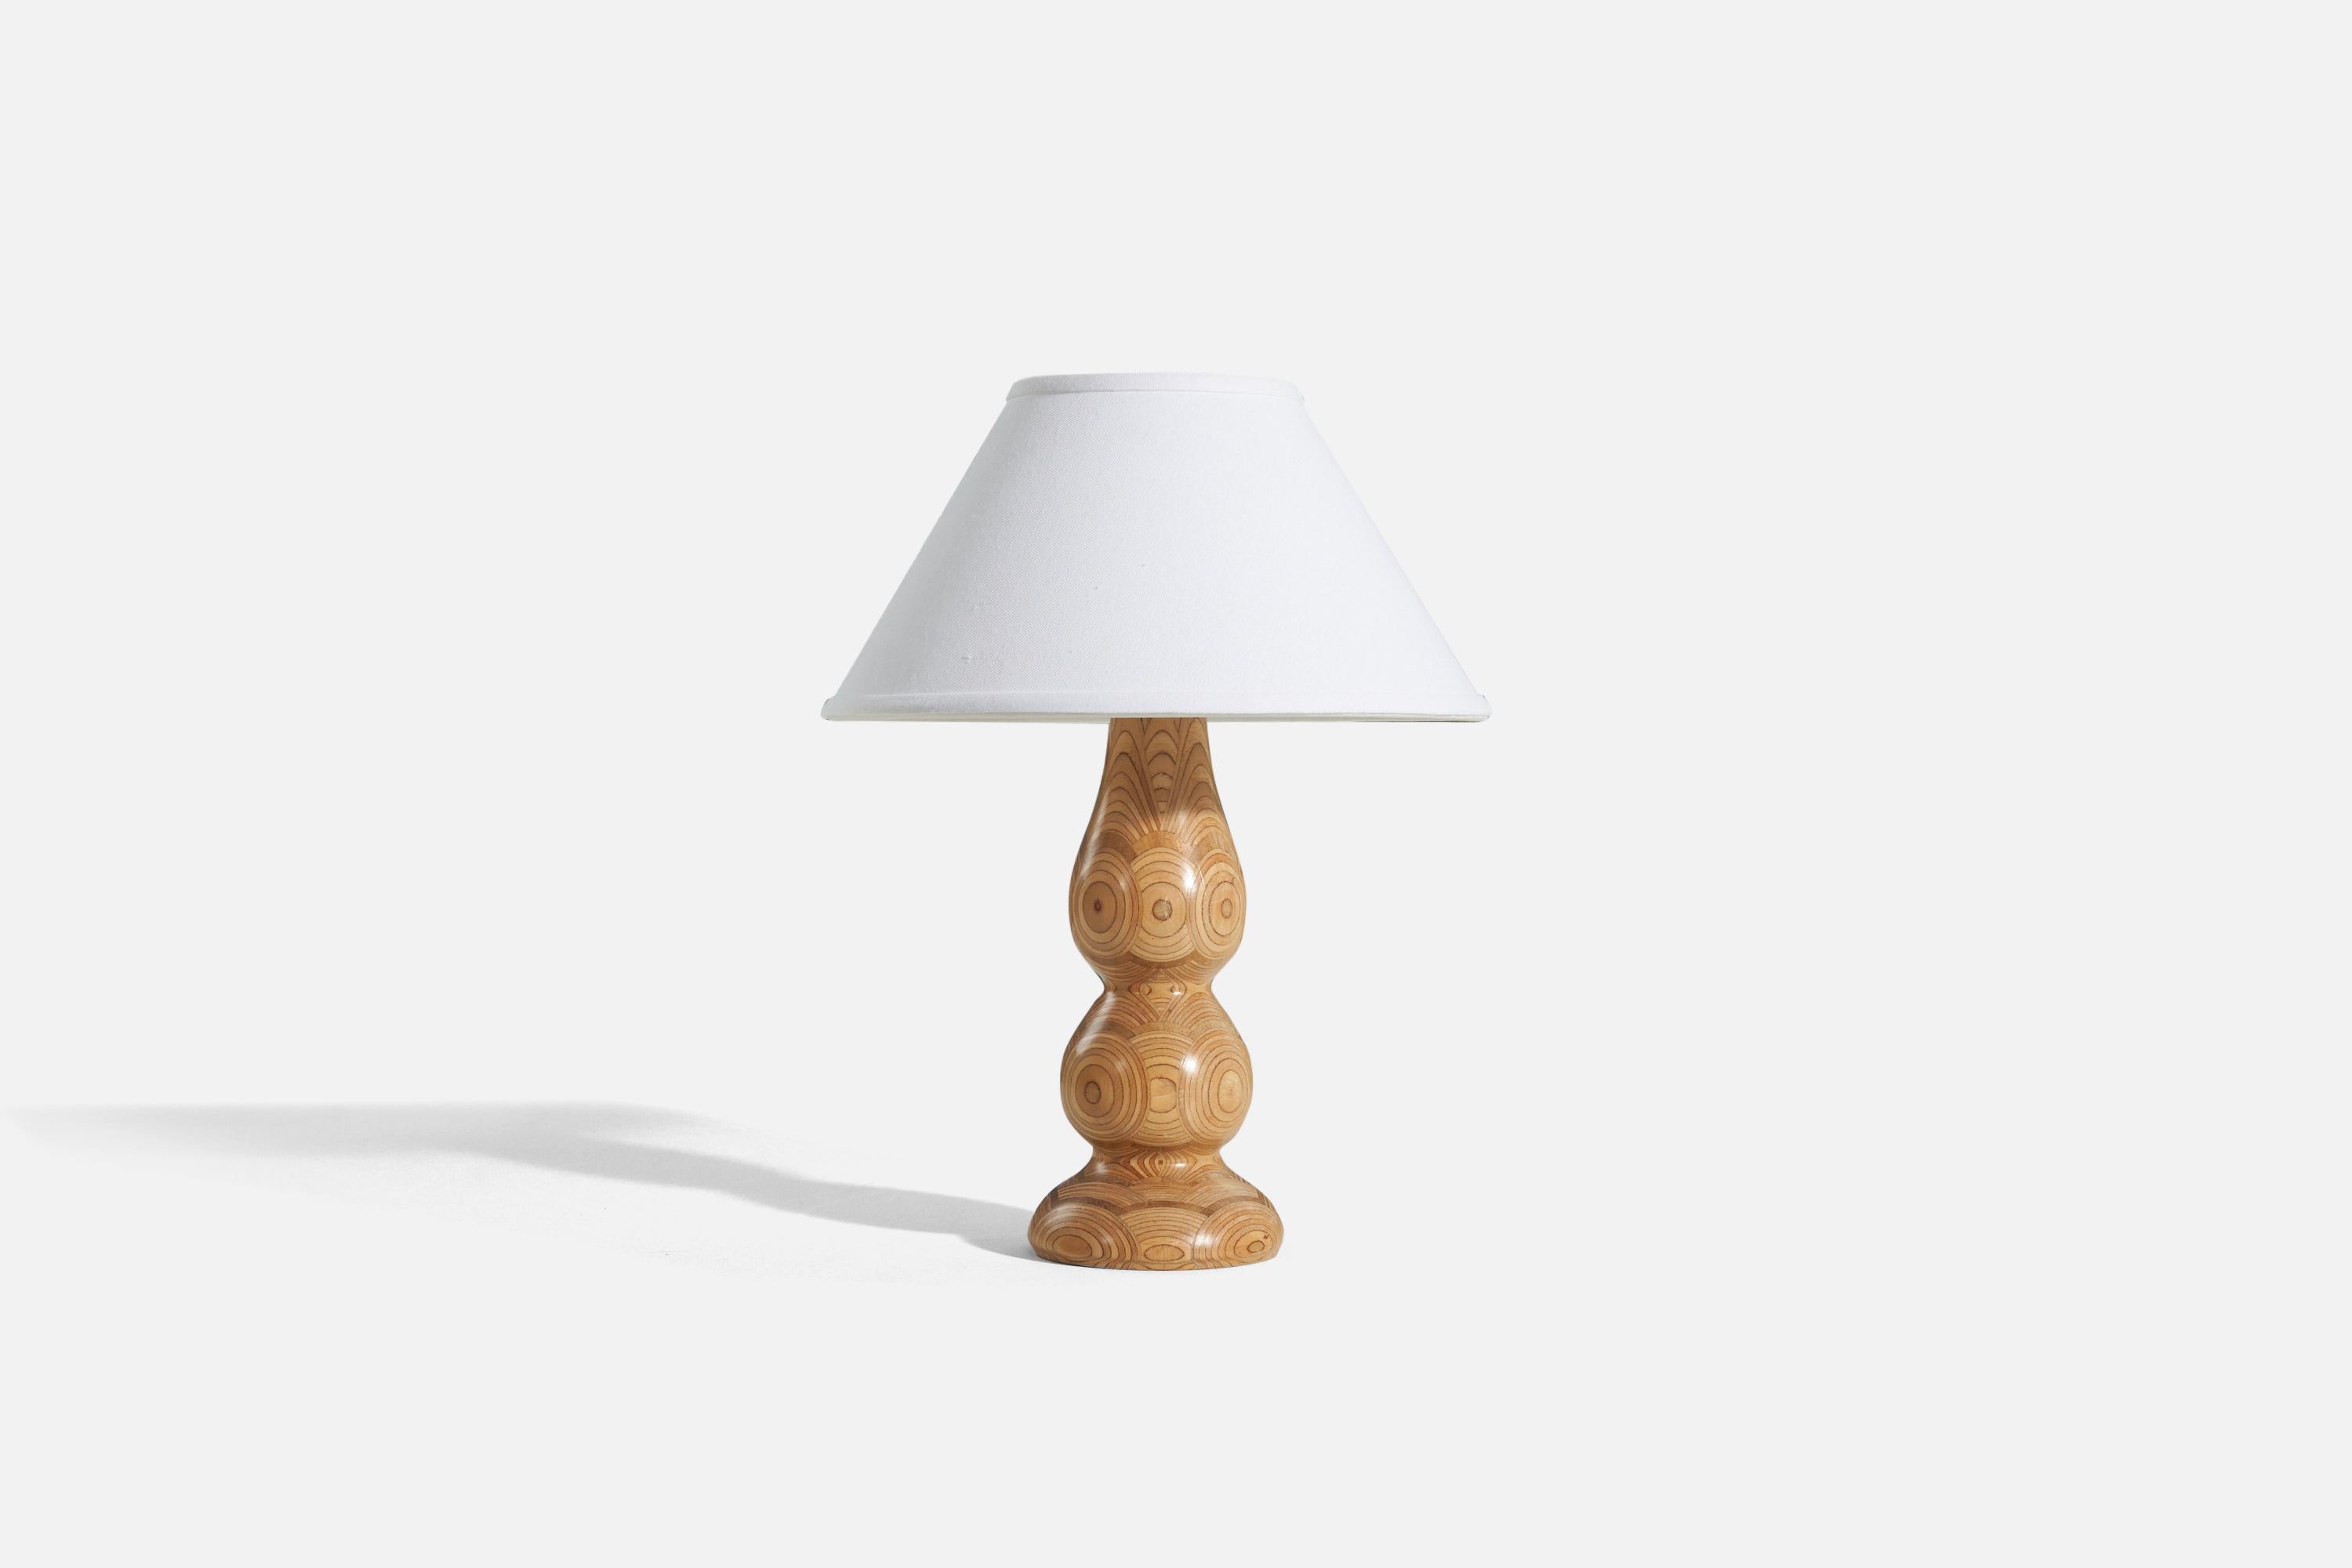 A laminated pine table lamp, designed and produced by a Swedish designer, Sweden, 1970s.

Sold without lampshade. 
Dimensions of Lamp (inches) : 13 x 4.75 x 4.75 (H x W x D)
Dimensions of Shade (inches) : 5 x 12.25 x 7.25 (T x B x H)
Dimension